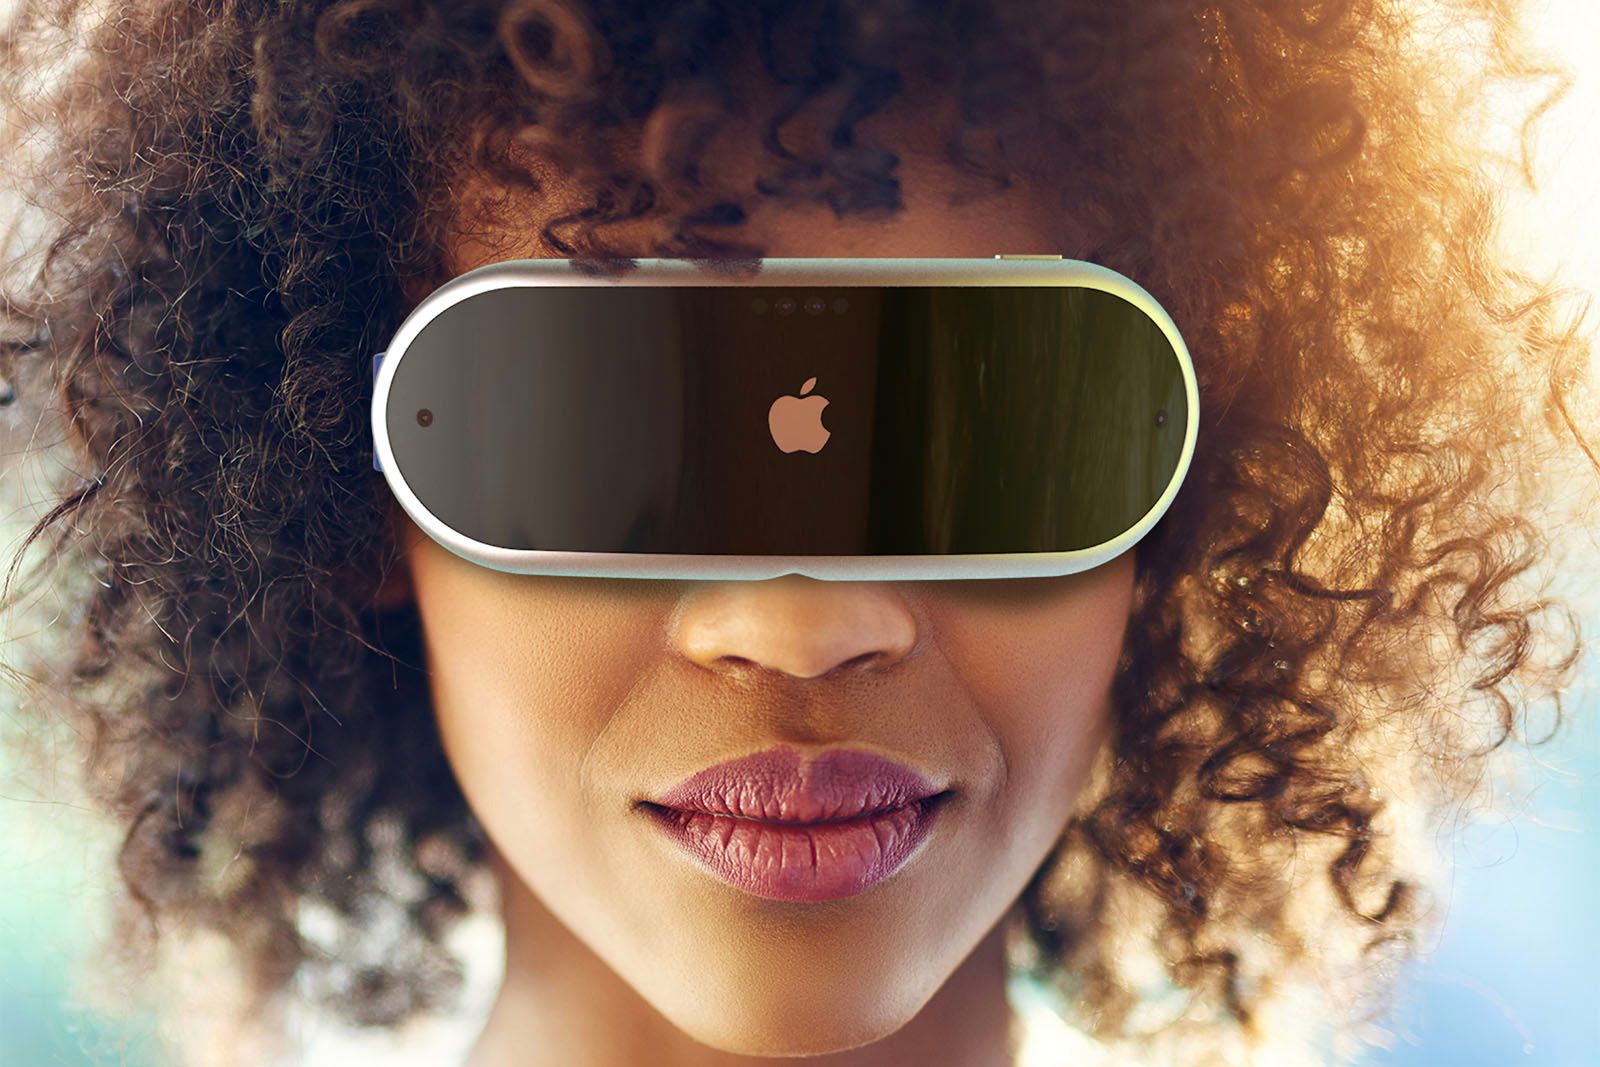 Apple's AR/VR headset shown off to executives as launch nears